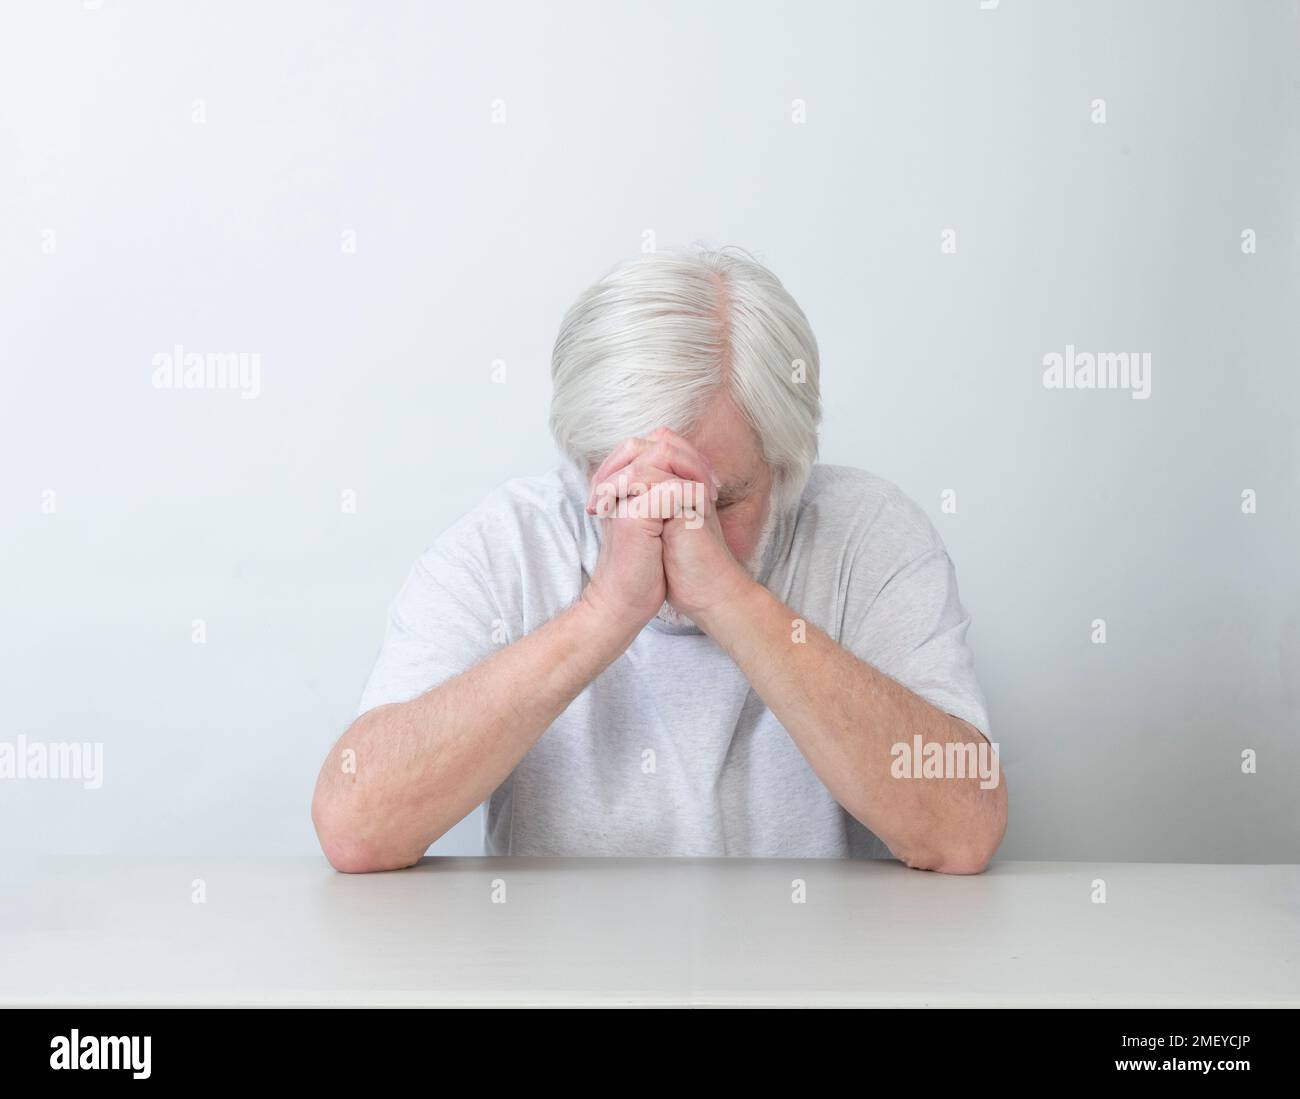 Horizontal shot of a white haired man sitting alone in sadness, prayer or worry.  White background.  Lots of copy space. Stock Photo